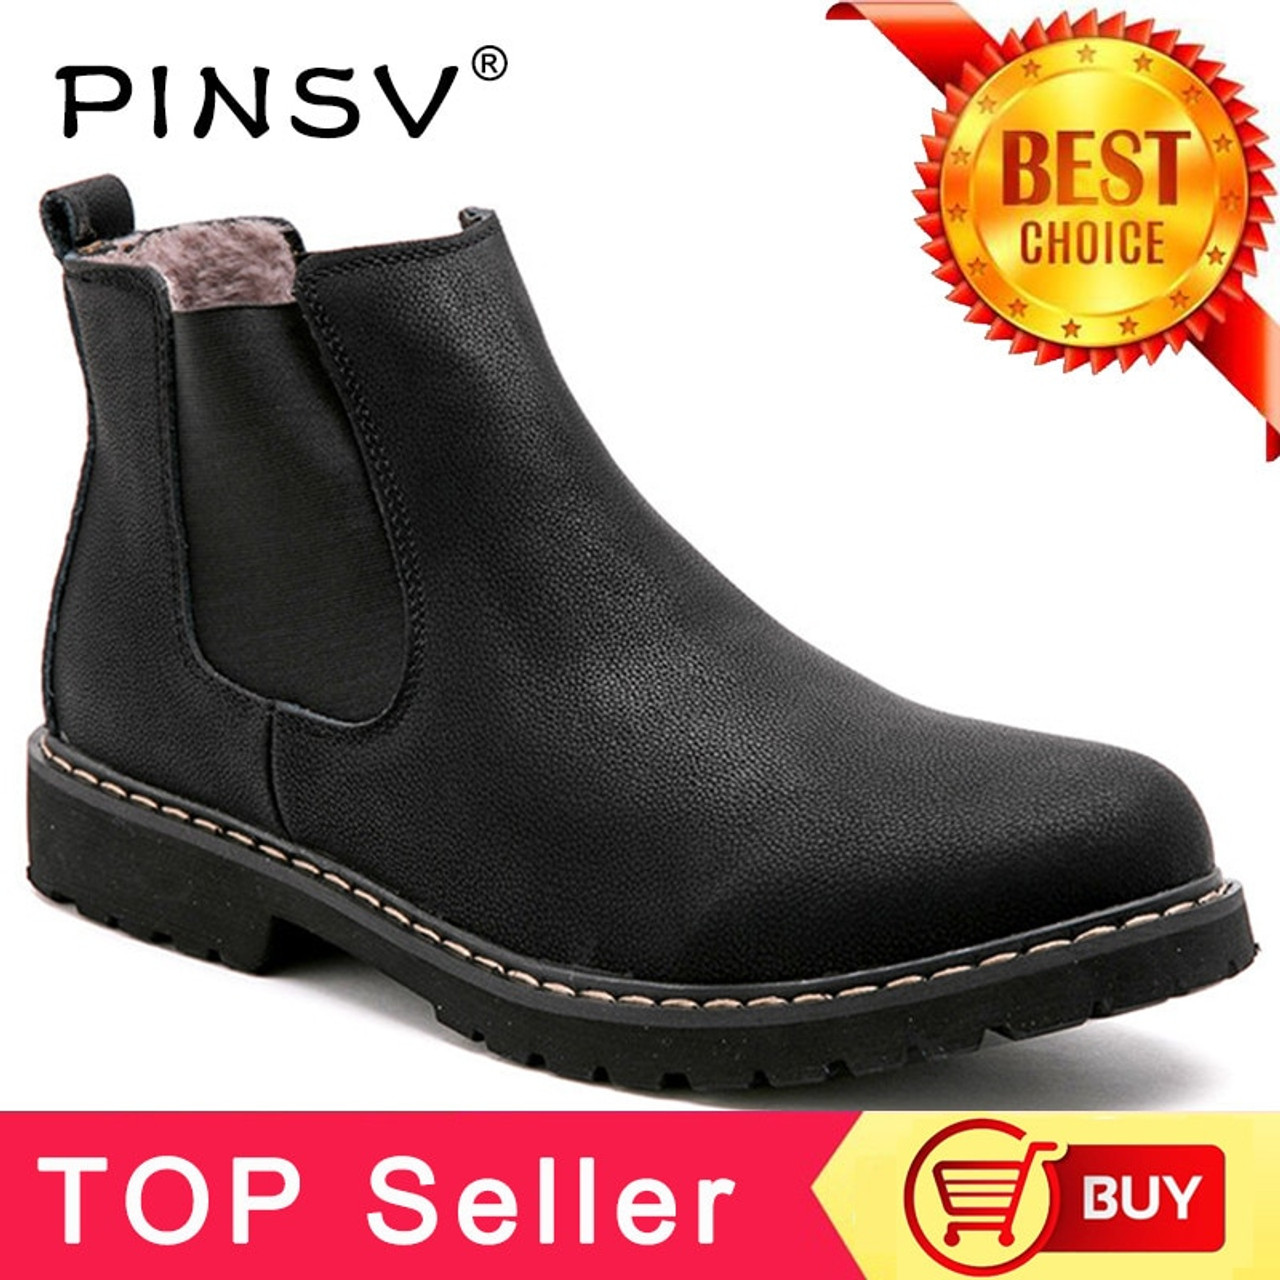 warm leather boots mens